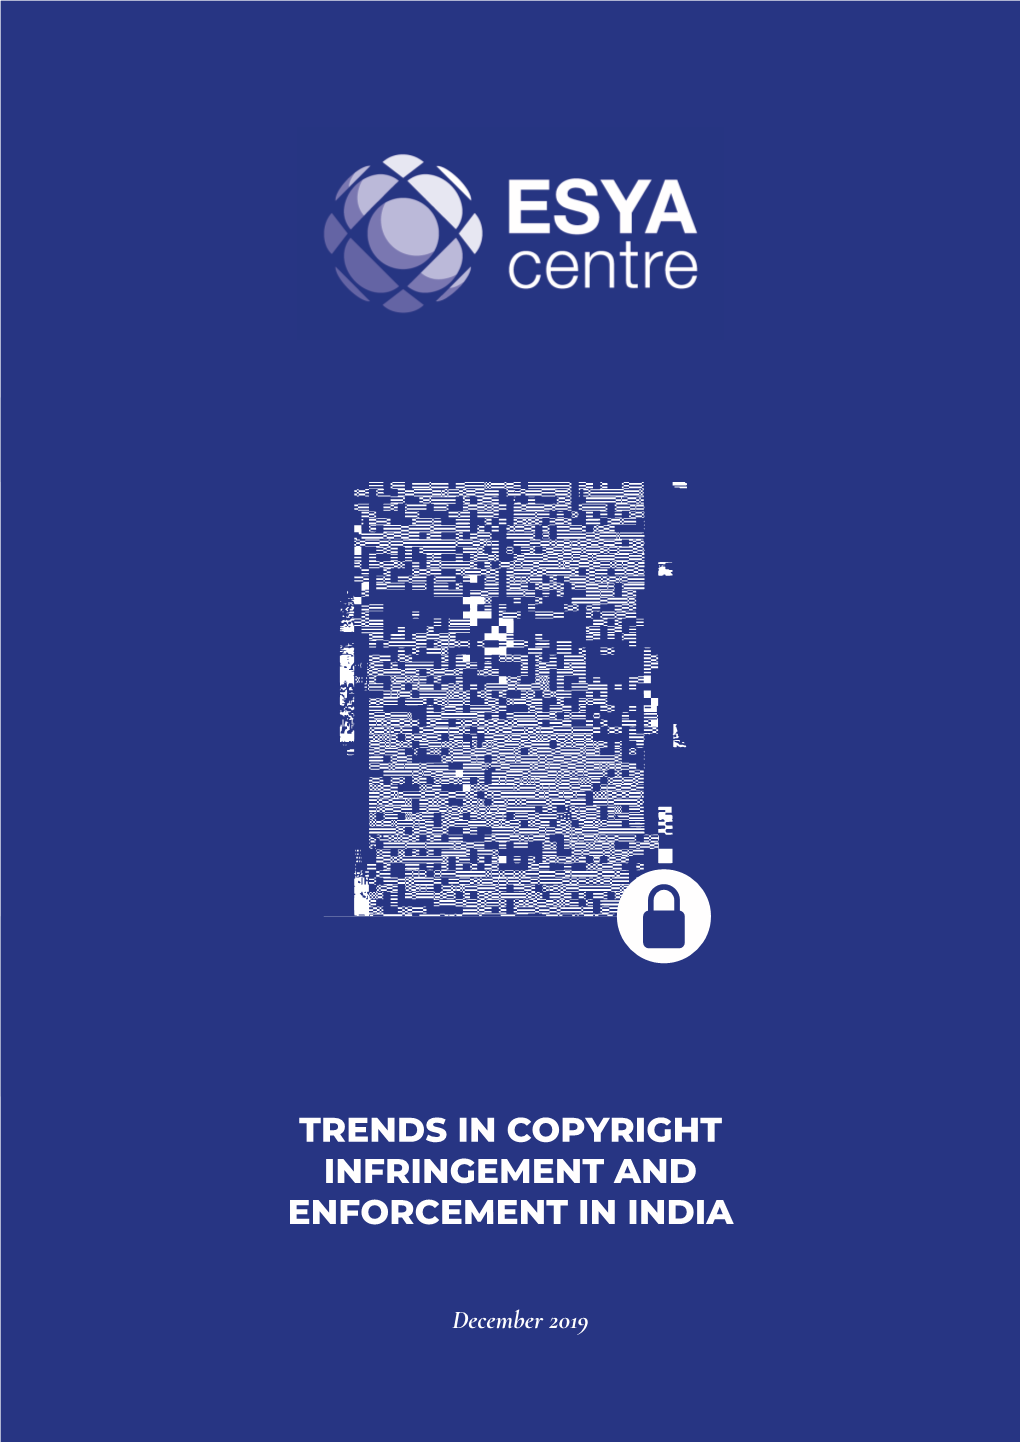 Trends in Copyright Infringement and Enforcement in India